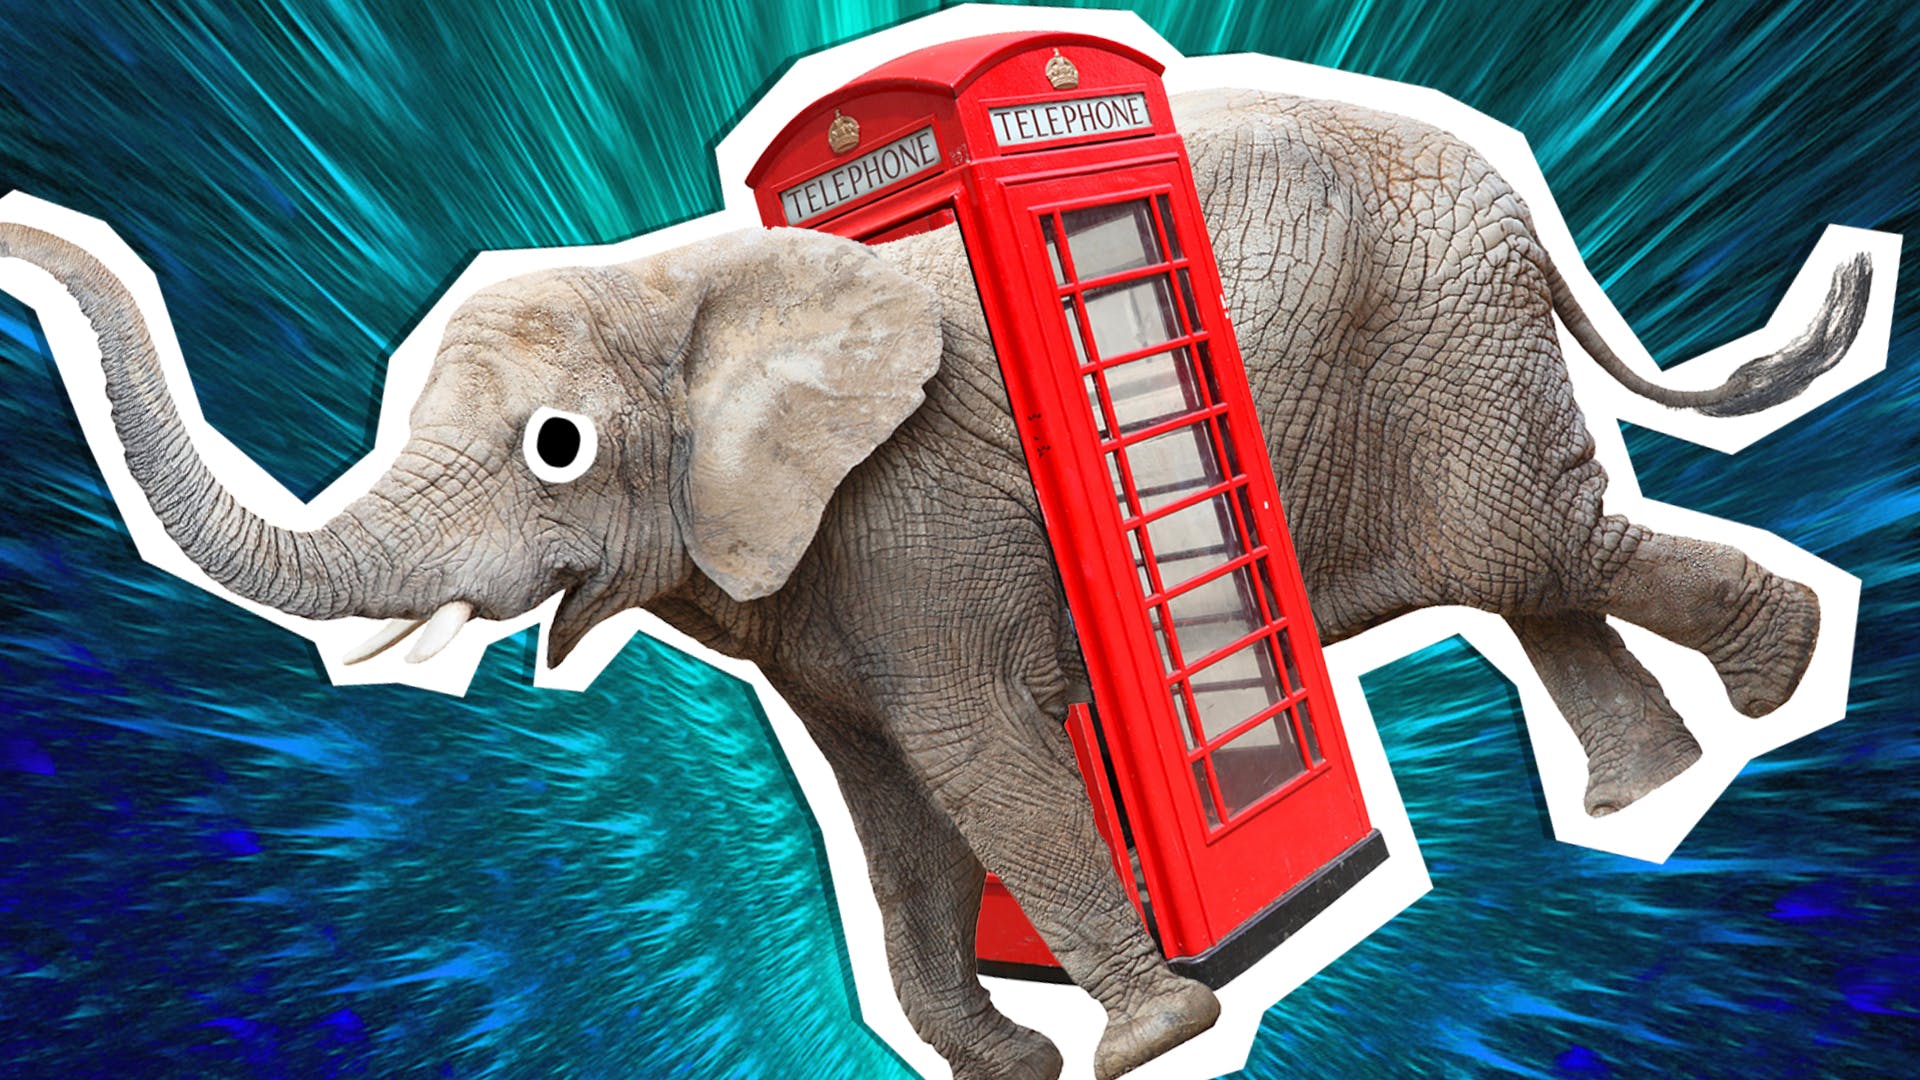 An elephant stuck in a phone booth | What Do You Call An Elephant in a Phone Booth?